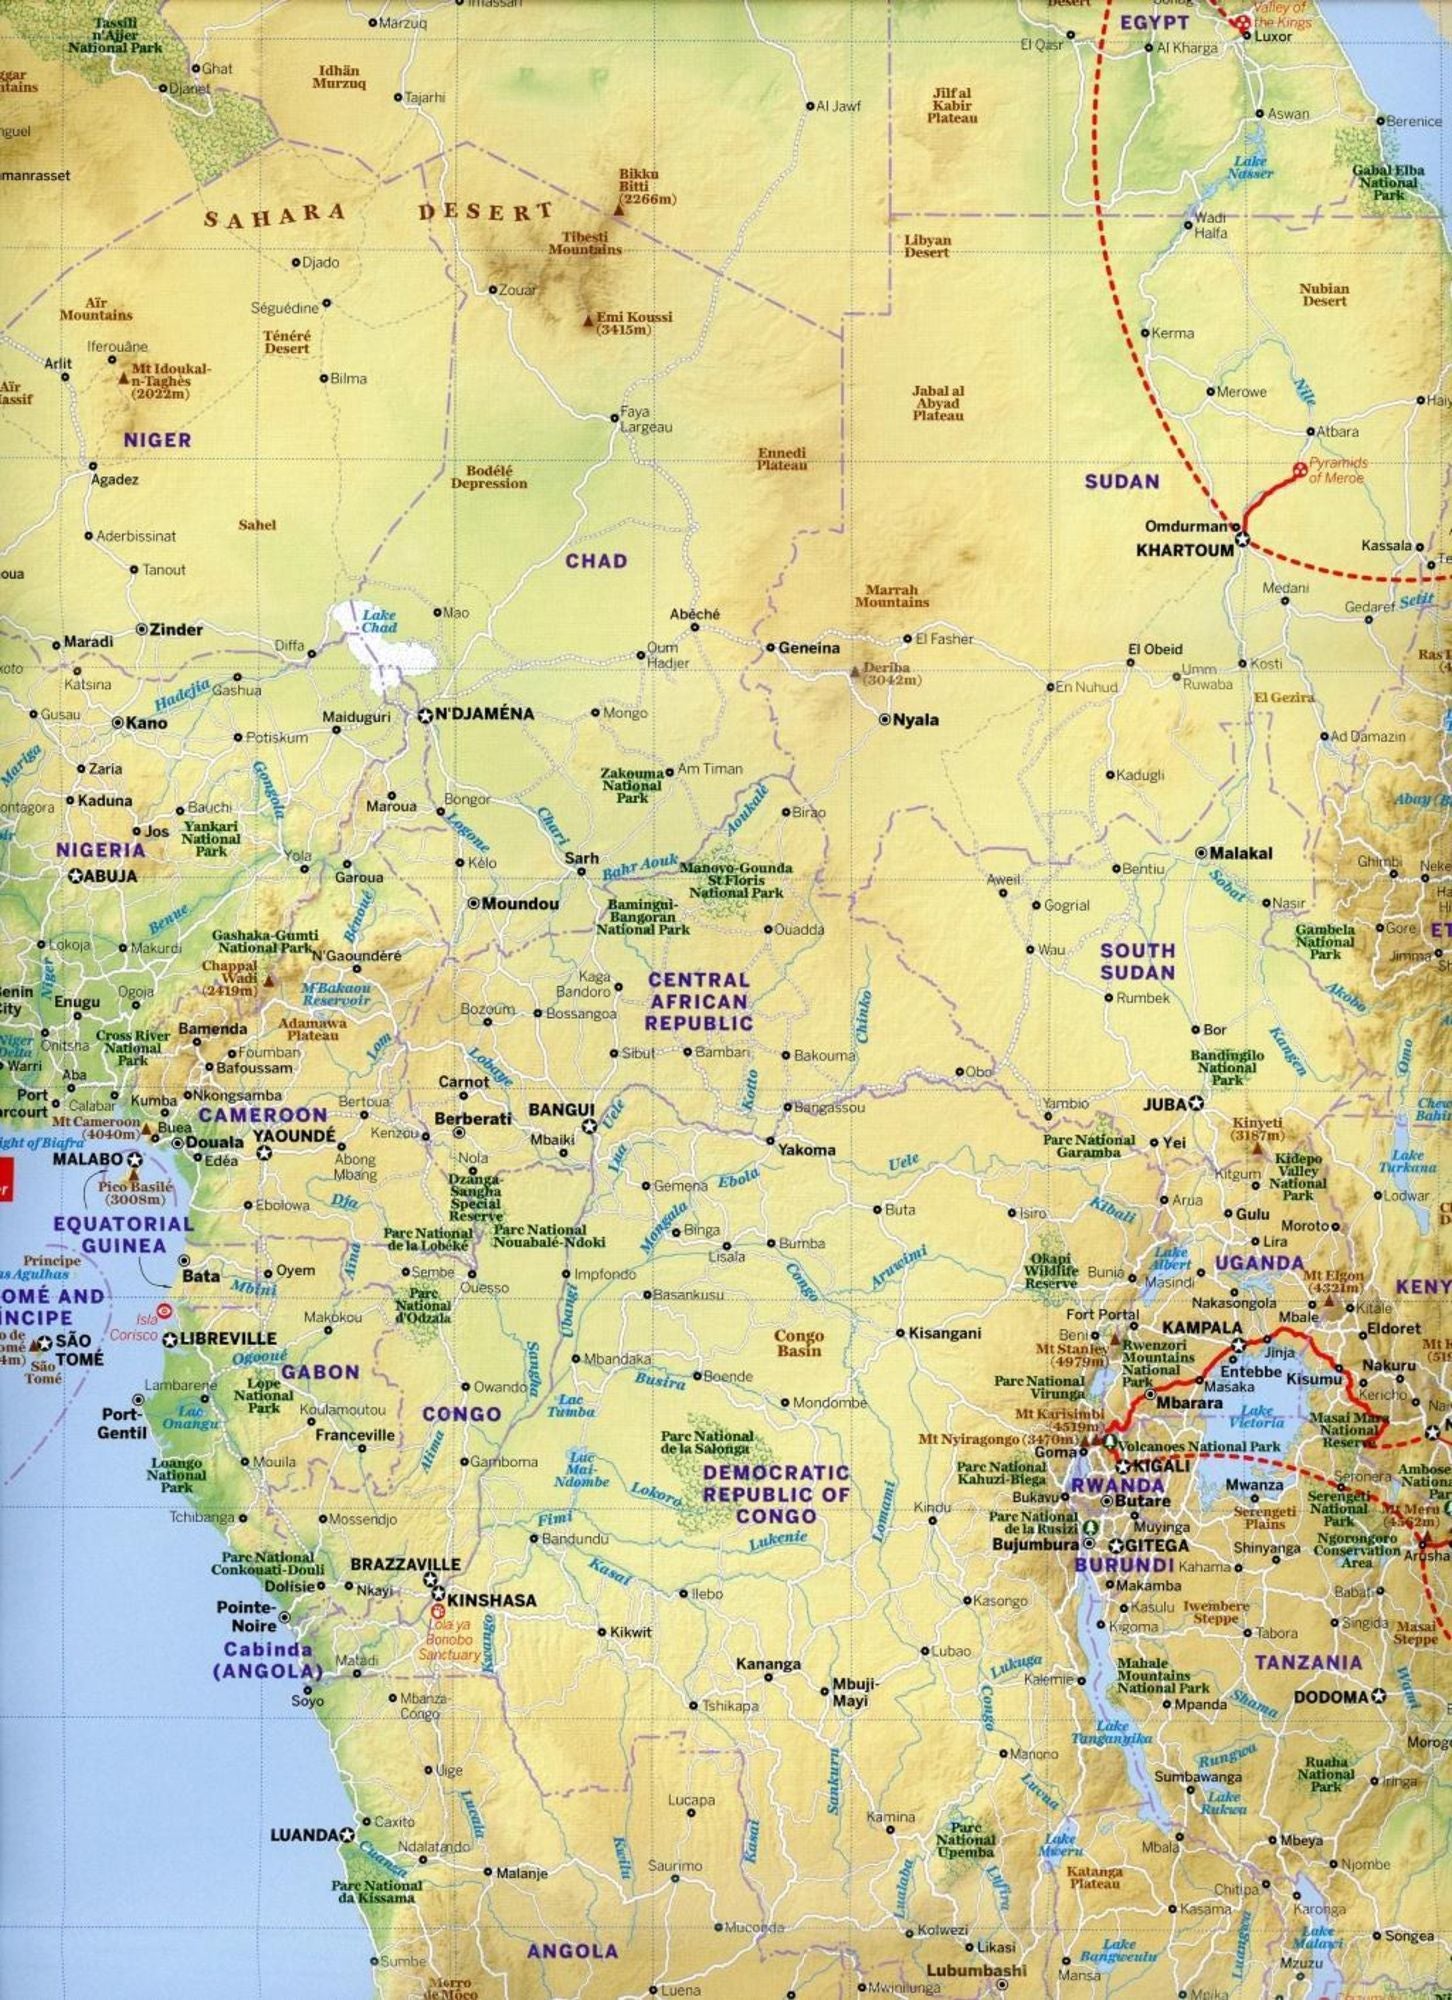 Lonely Planet Planning Map Africa